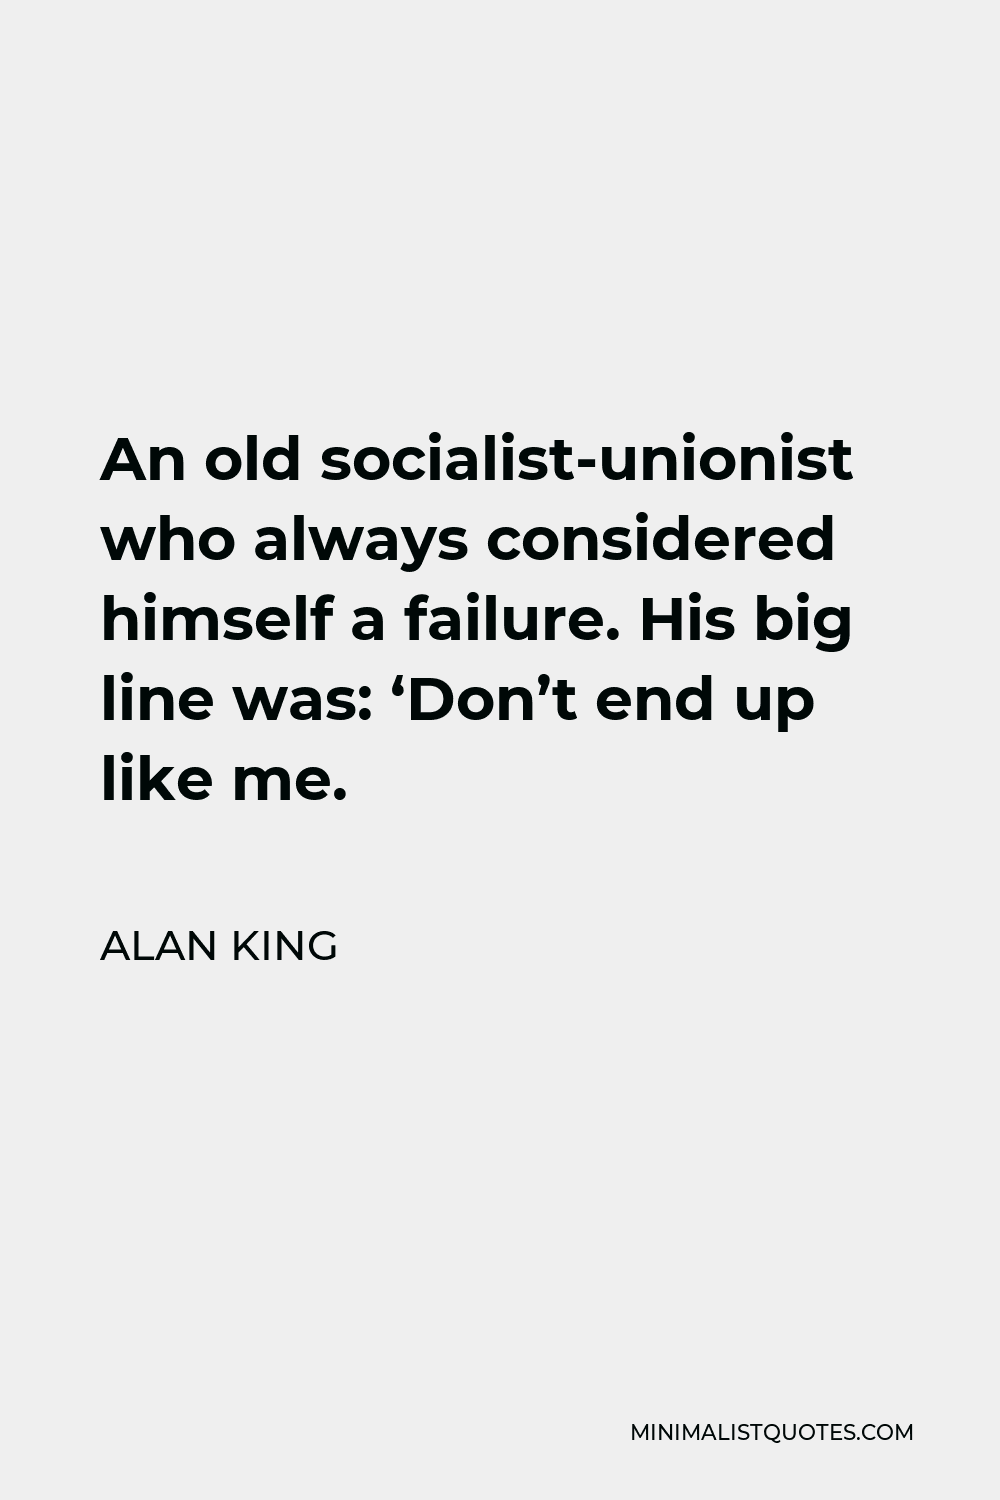 Alan King Quote - An old socialist-unionist who always considered himself a failure. His big line was: ‘Don’t end up like me.